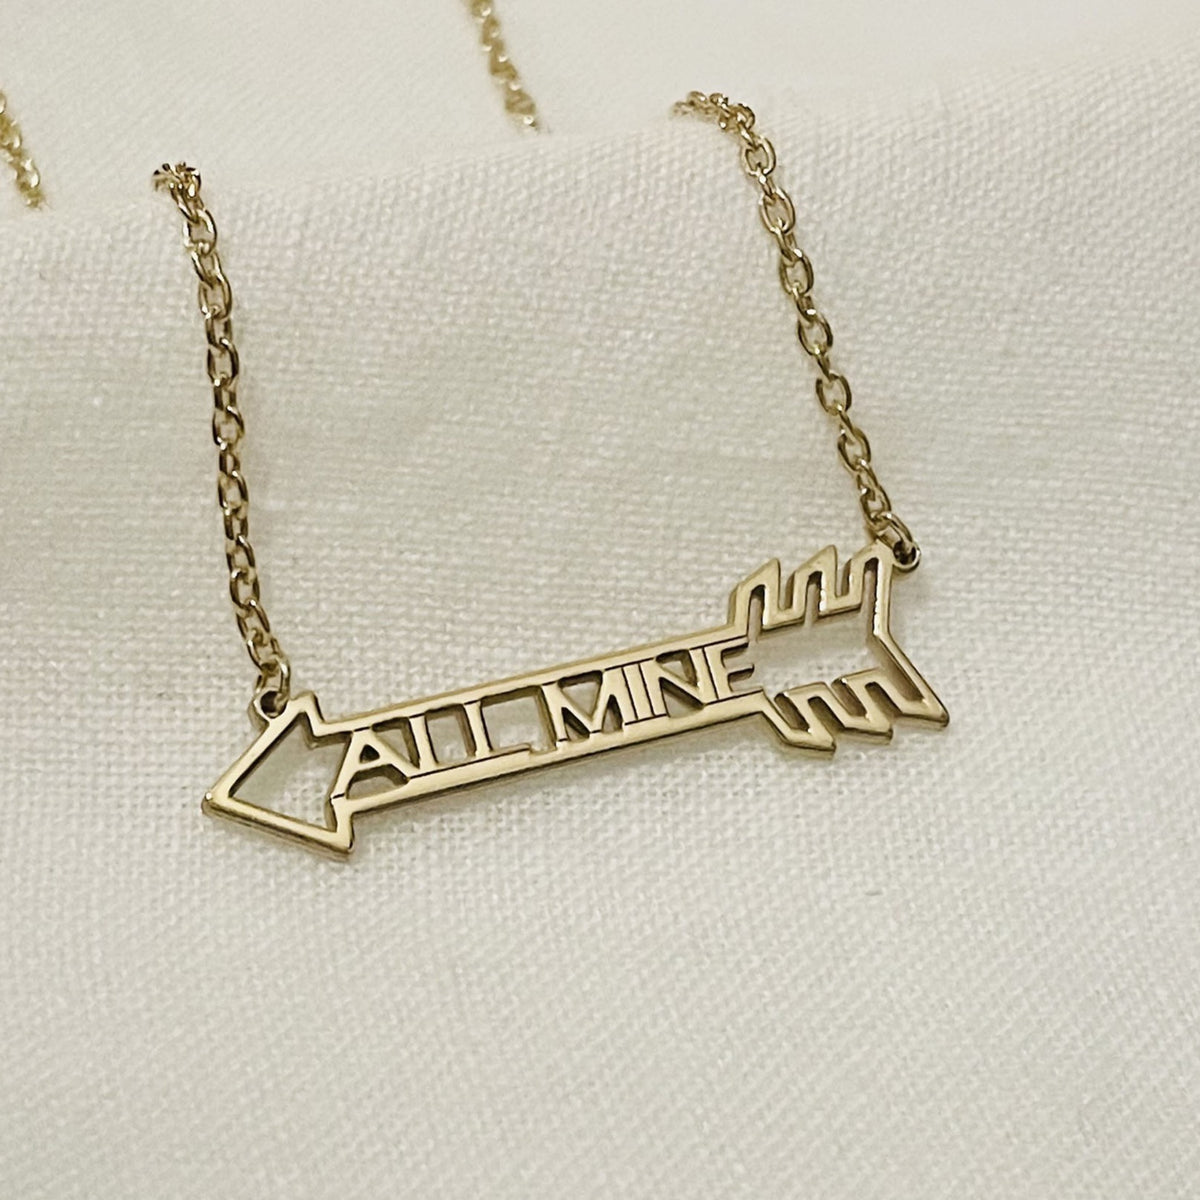 Personalized Name Arrow Necklace (1.5 inches wide) Available in Sterling Silver, Gold Plate/SS, Rose Gold Plated/SS, 10K Yellow & White Gold